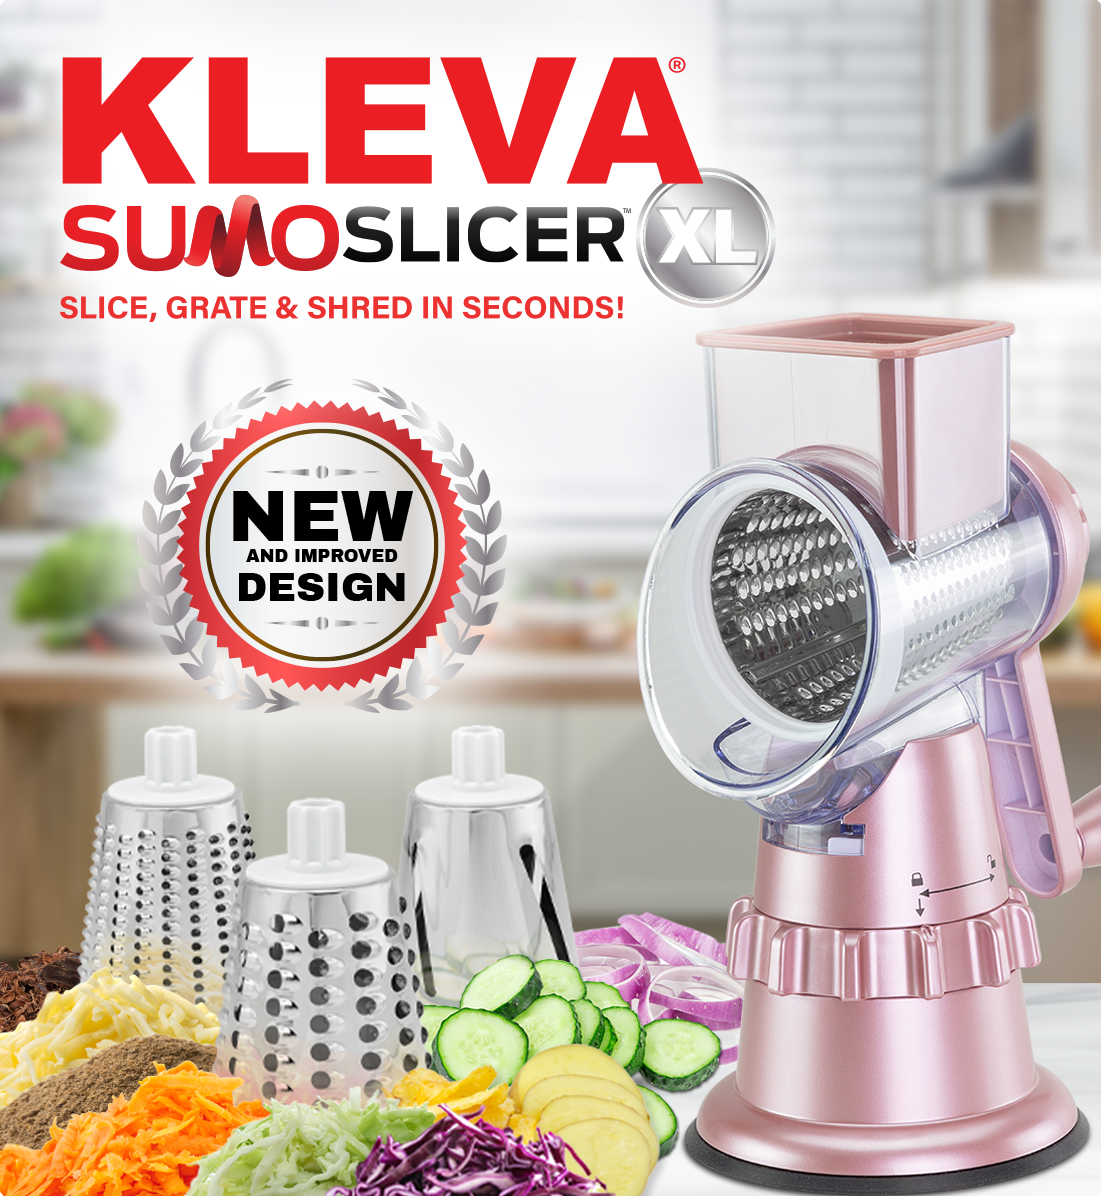 Kleva Range - Slice, grate and shred with just the turn of a